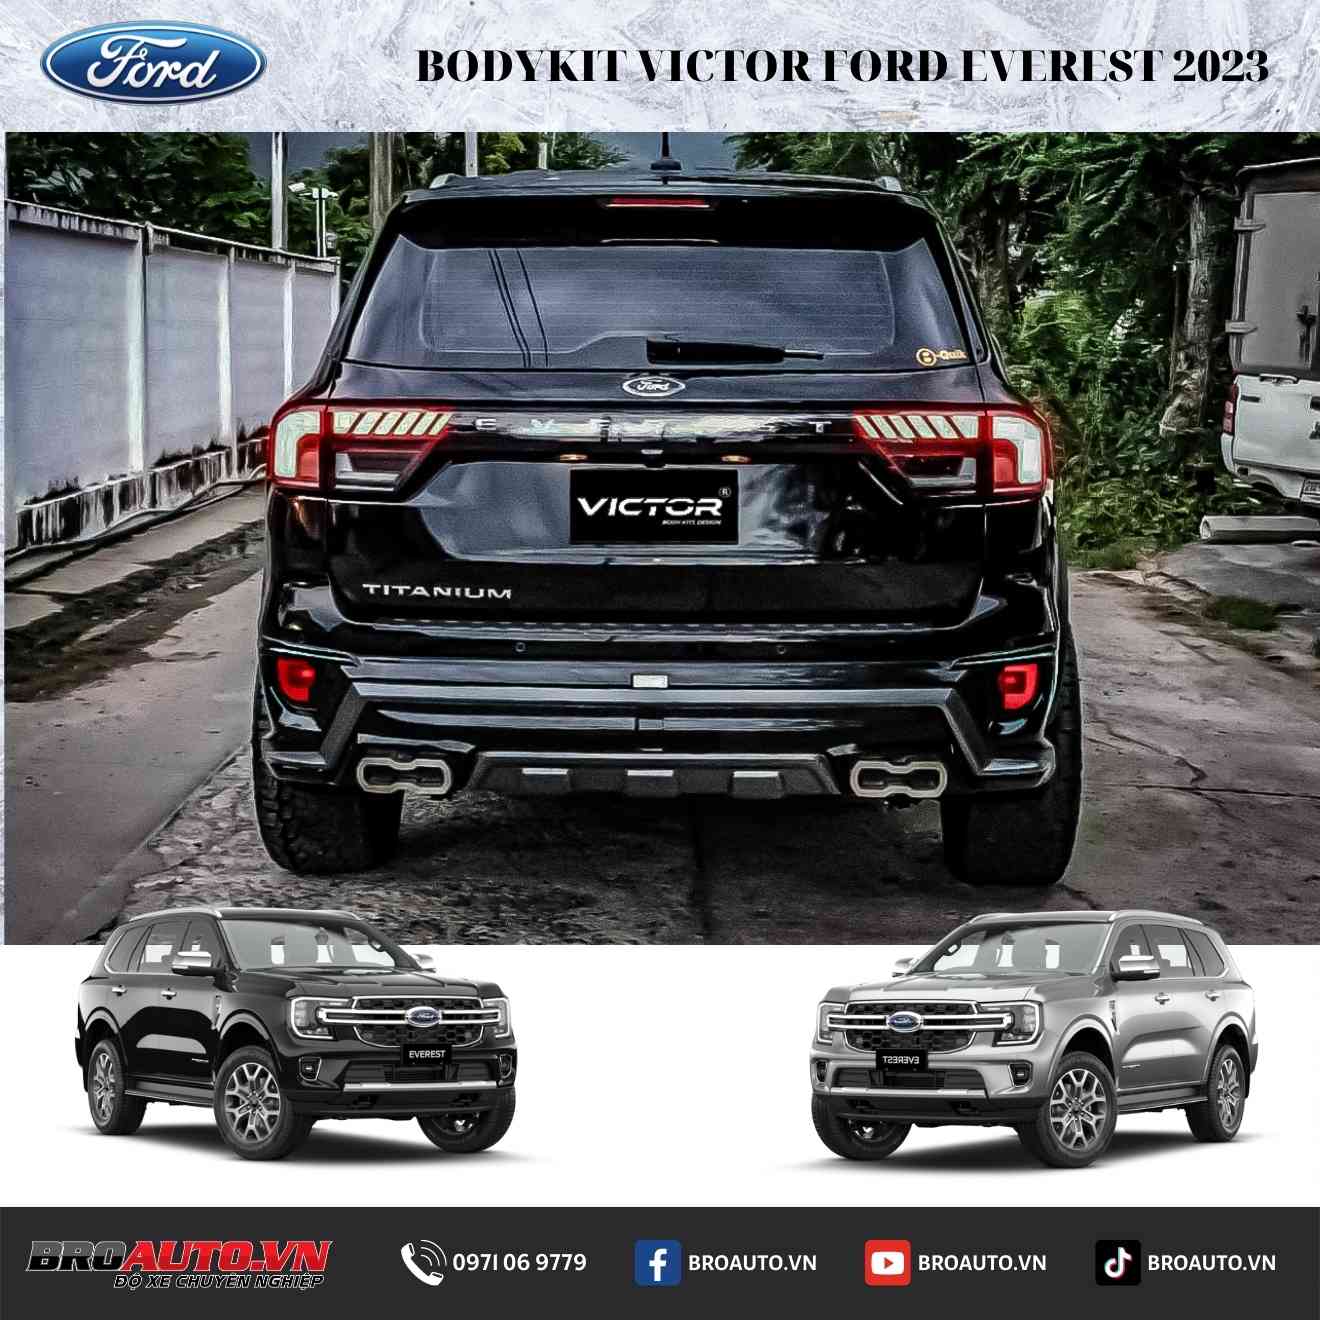 BODYKIT VICTOR CHO FORD EVEREST 2023